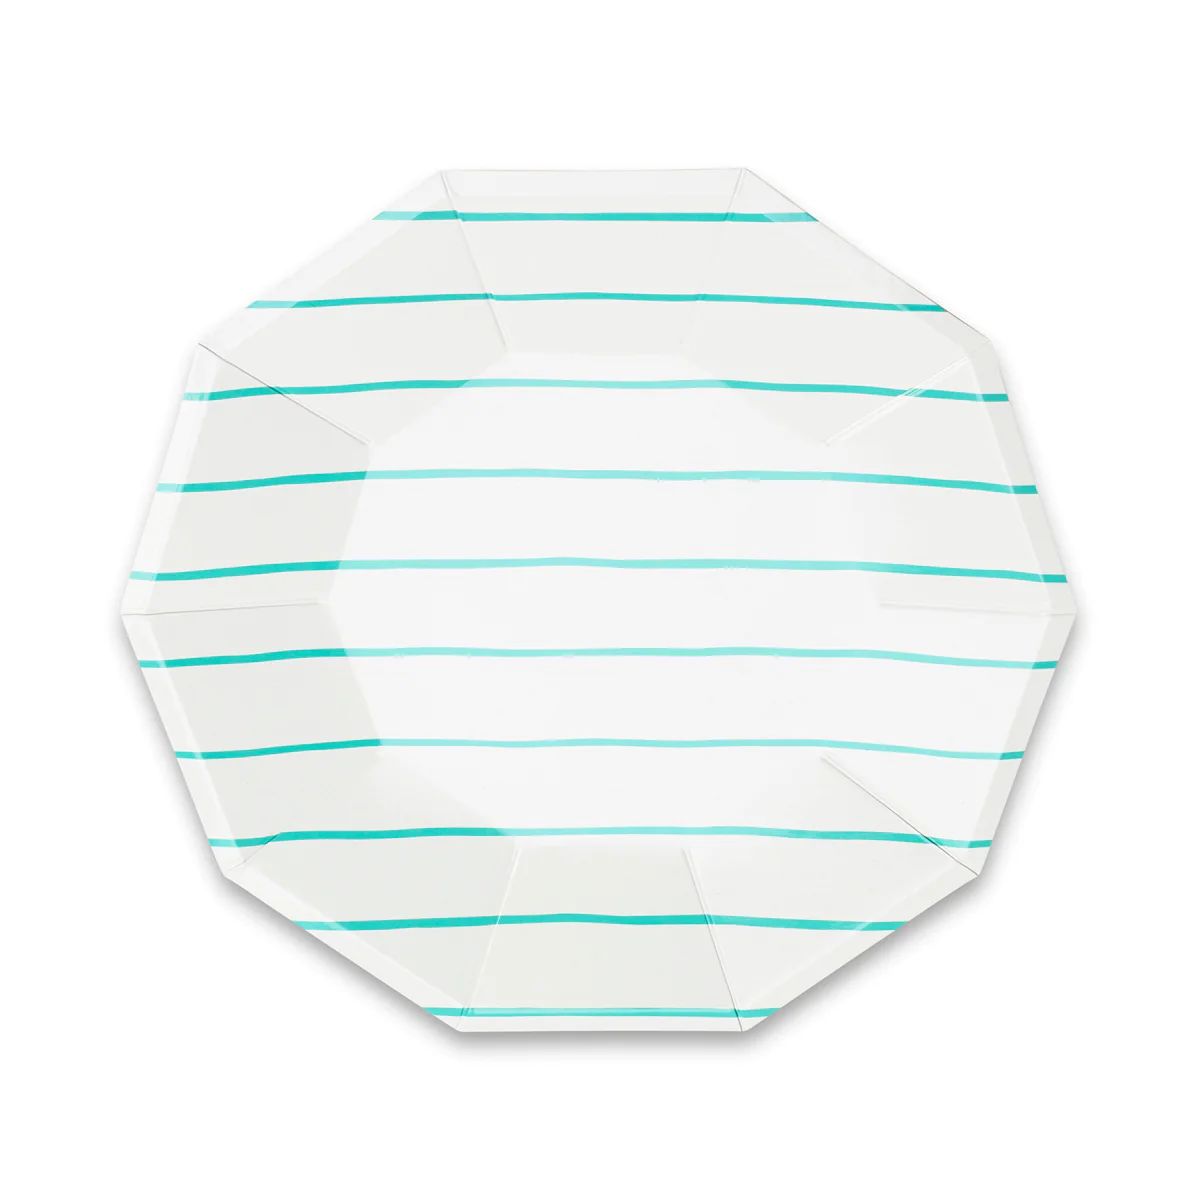 Frenchie Striped Large Paper Plates - Aqua Blue | Ellie and Piper